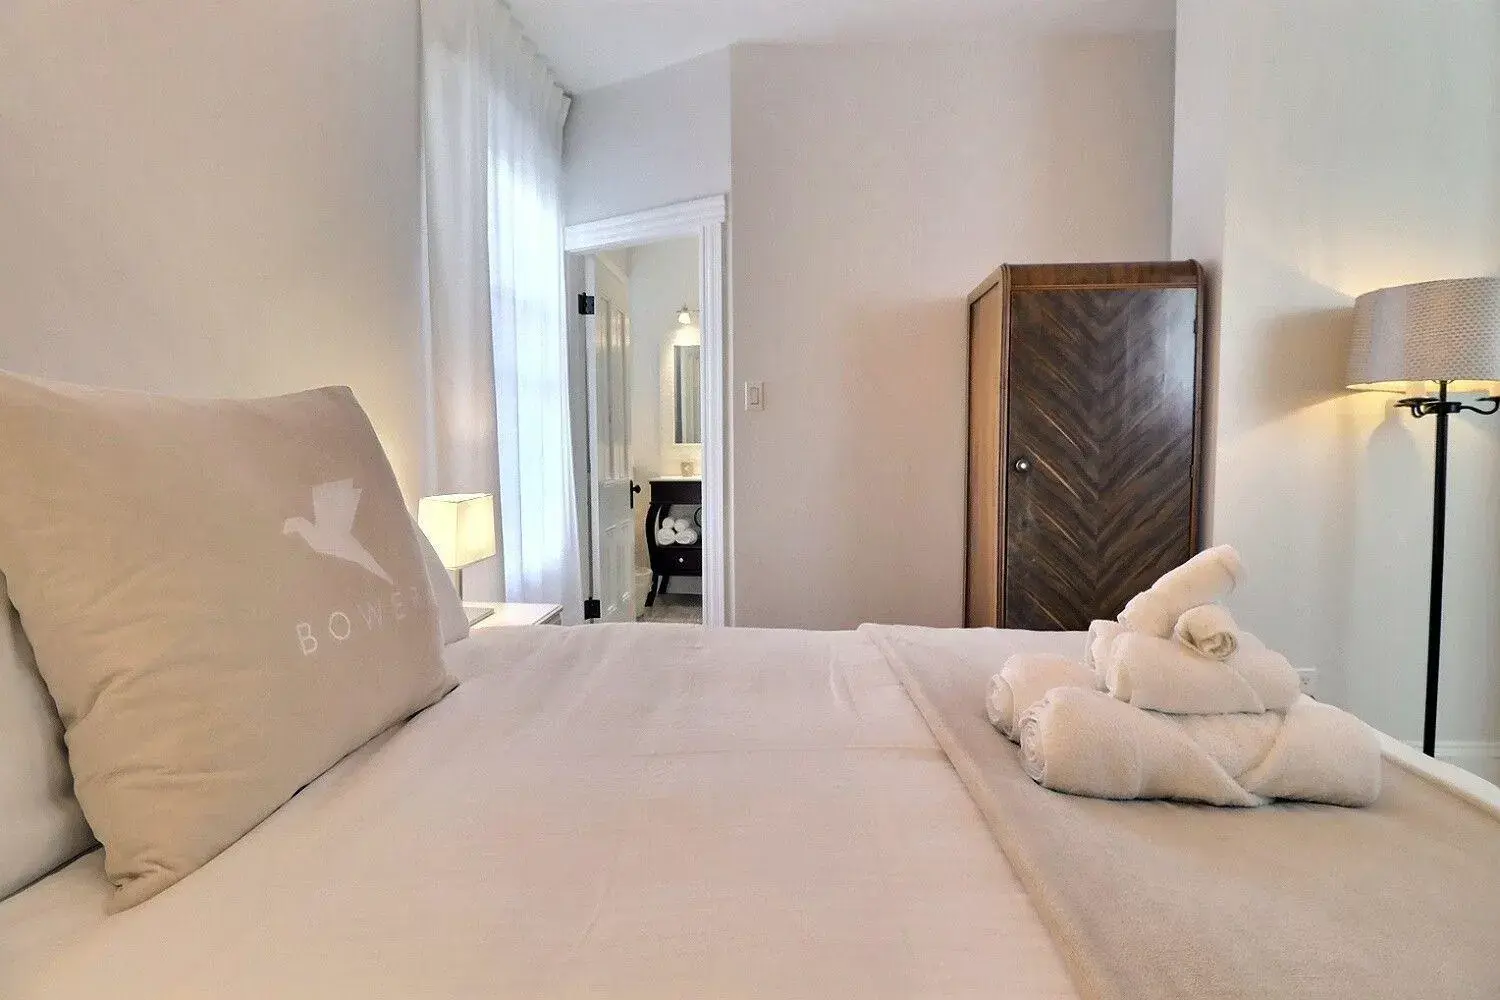 Bed in Hotel du Vieux Port by Bower Hotels & Suites